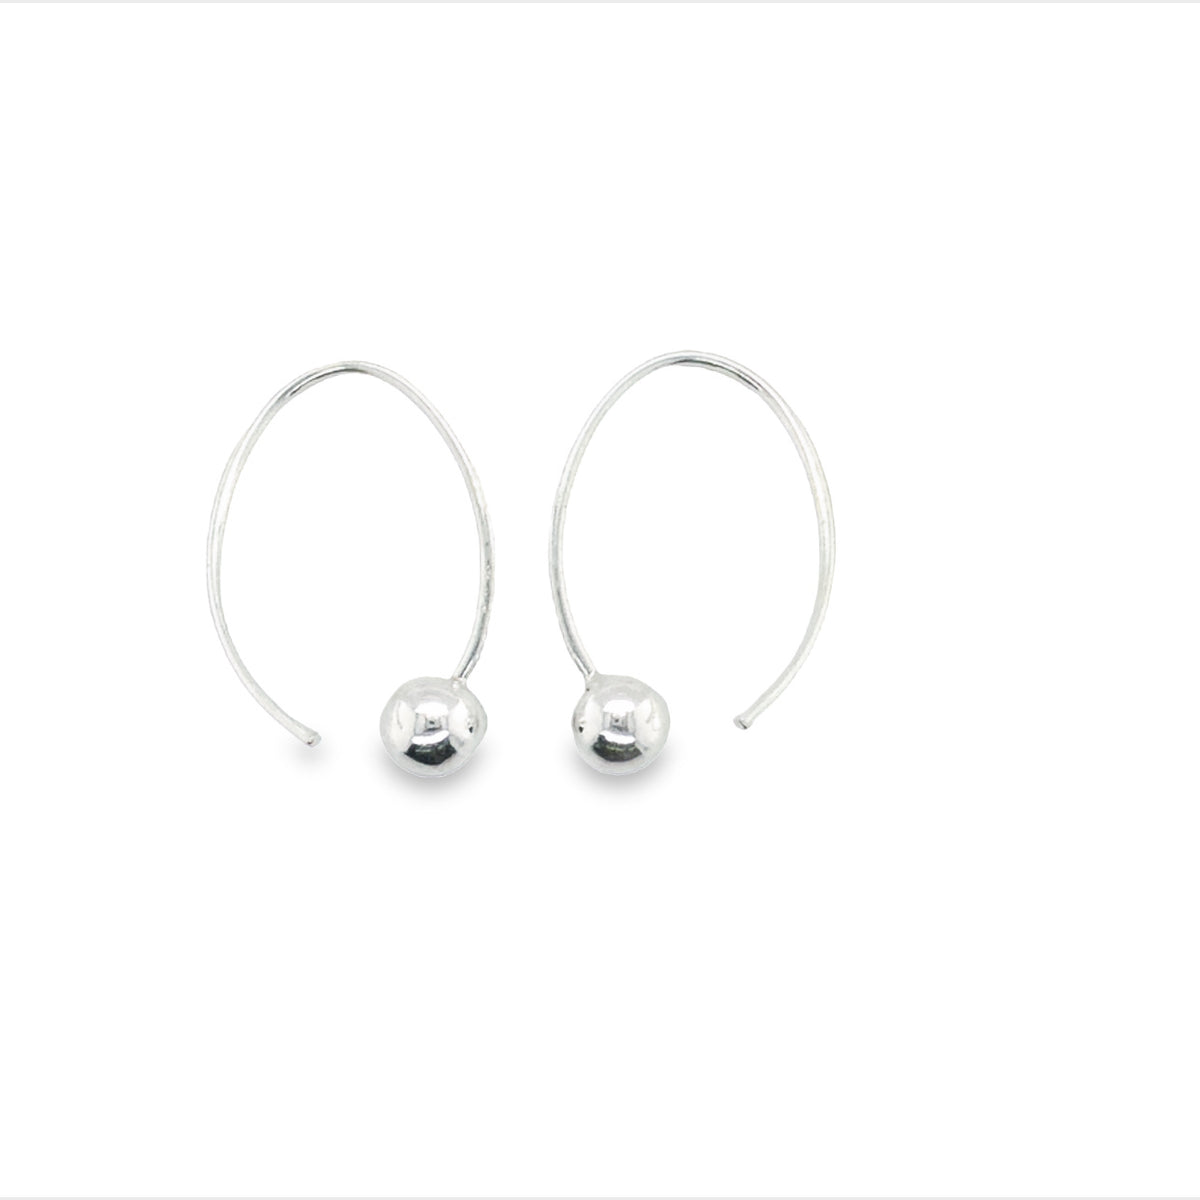 Onatah Sterling Silver Fixed Hook And Ball Earrings